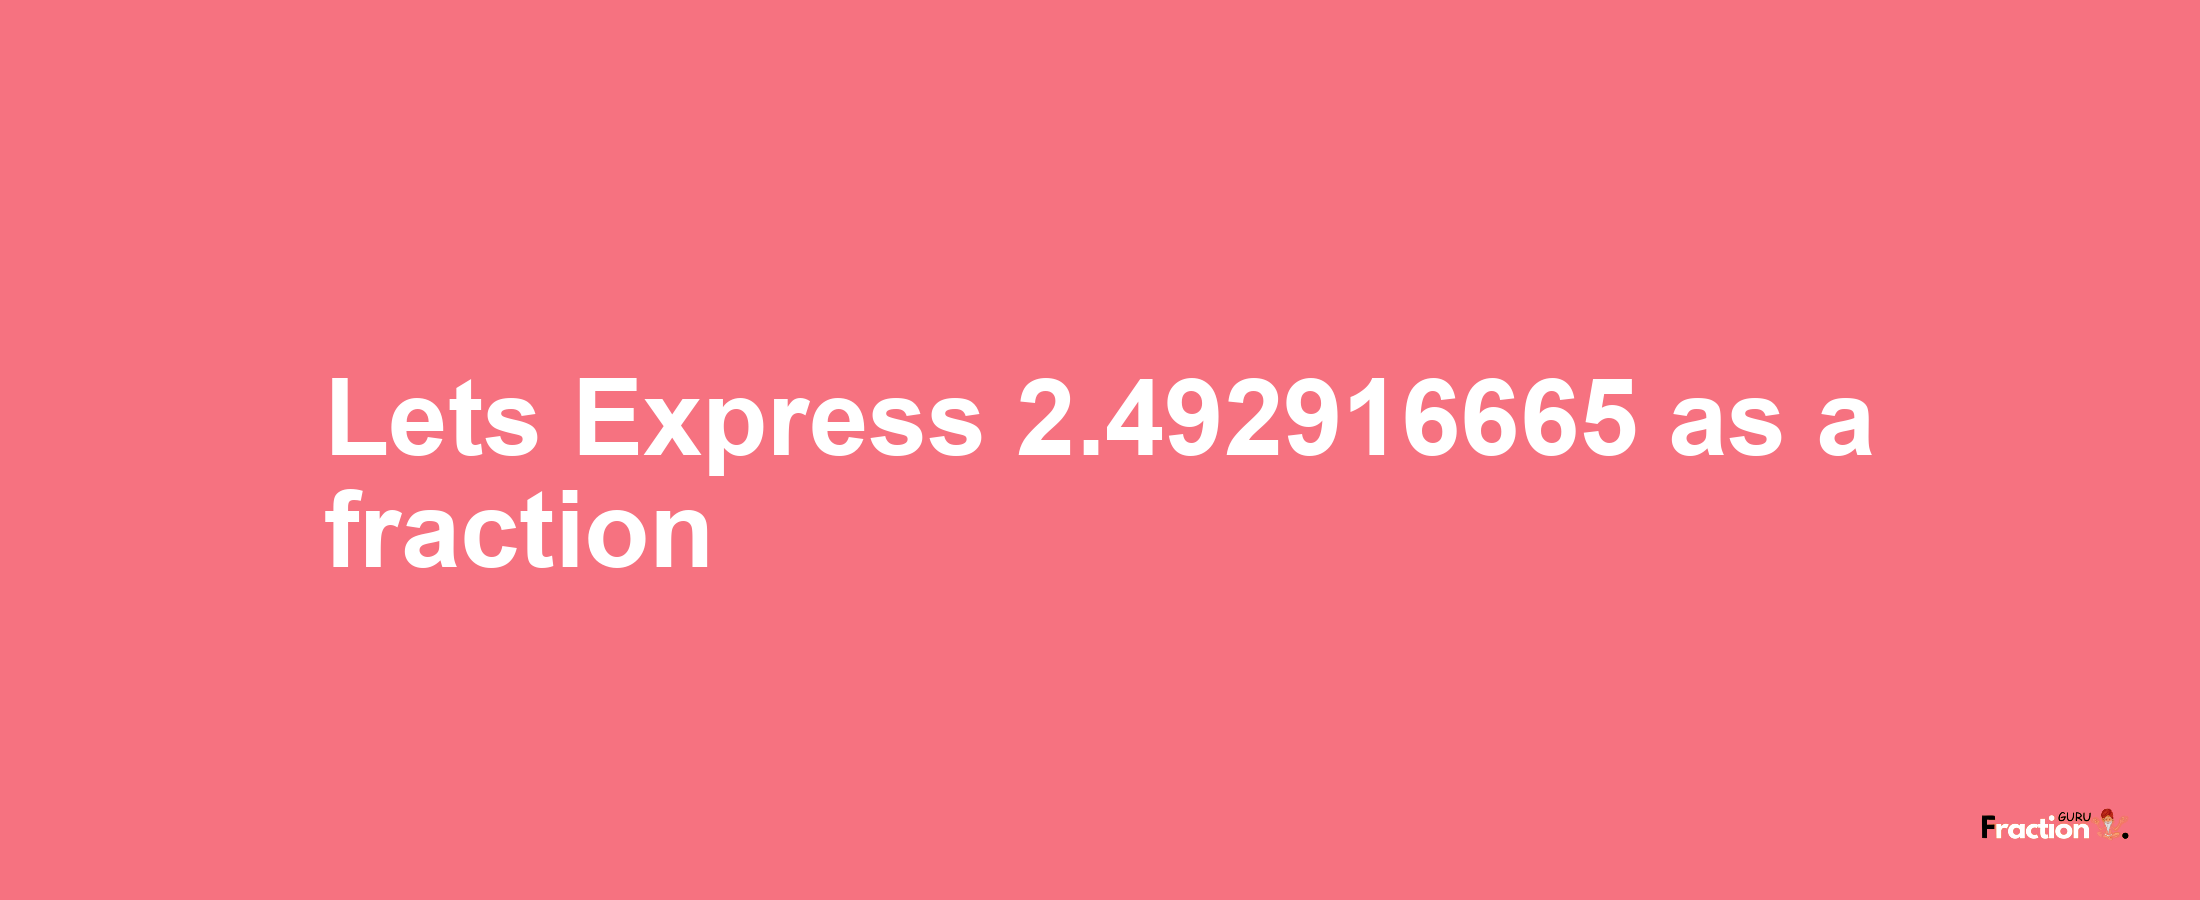 Lets Express 2.492916665 as afraction